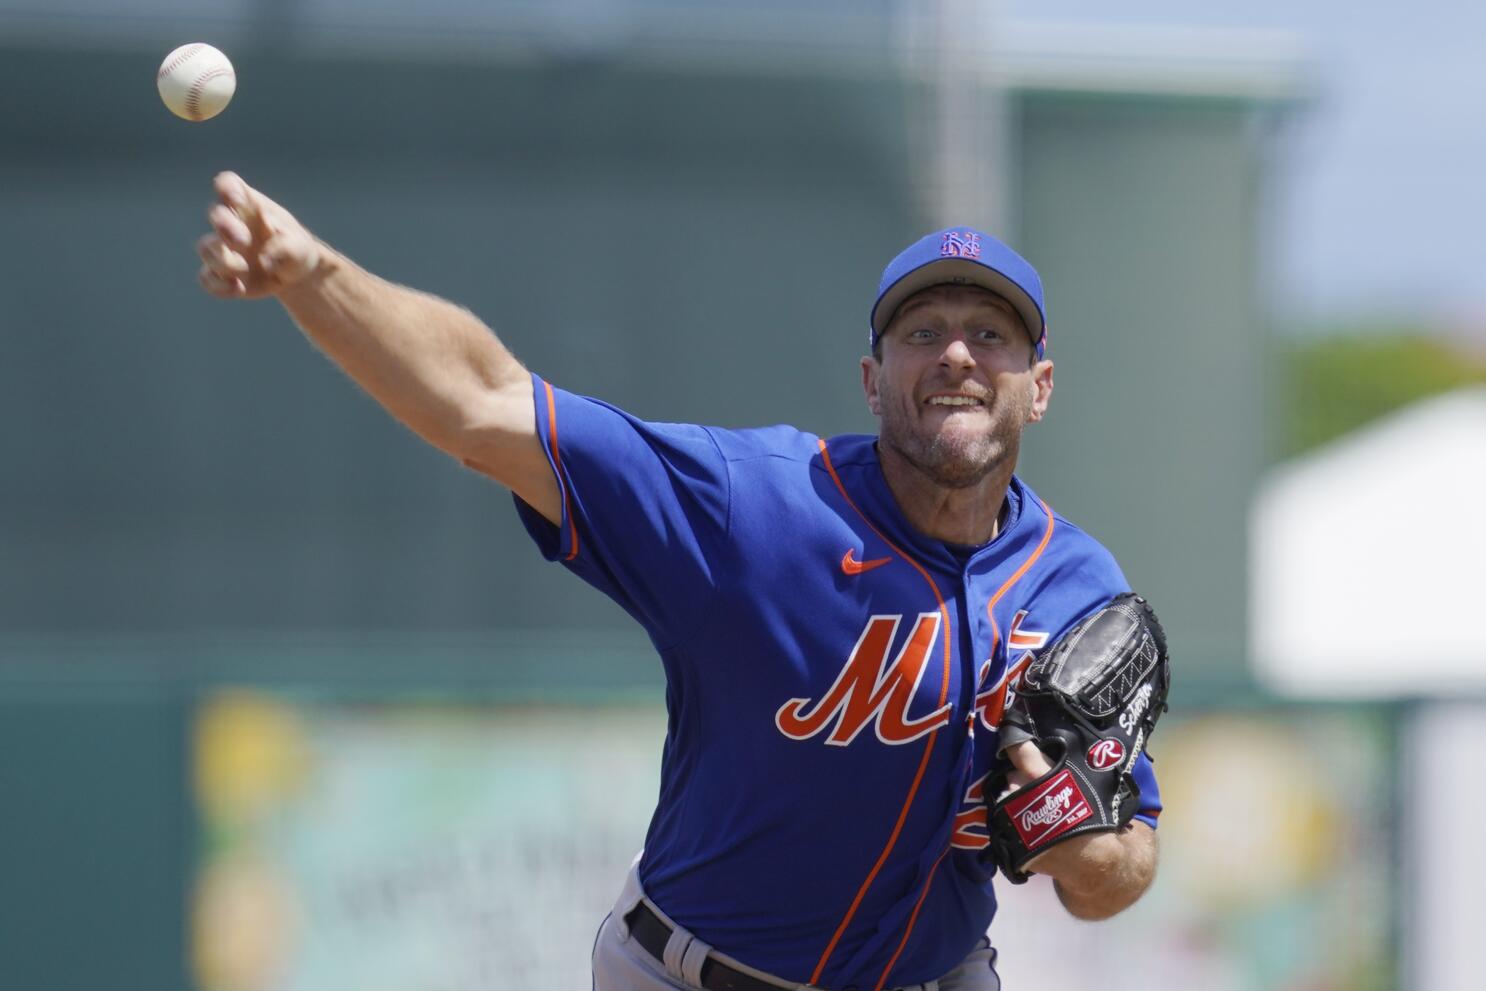 LEADING OFF: Mets aces Scherzer, deGrom pitch far apart